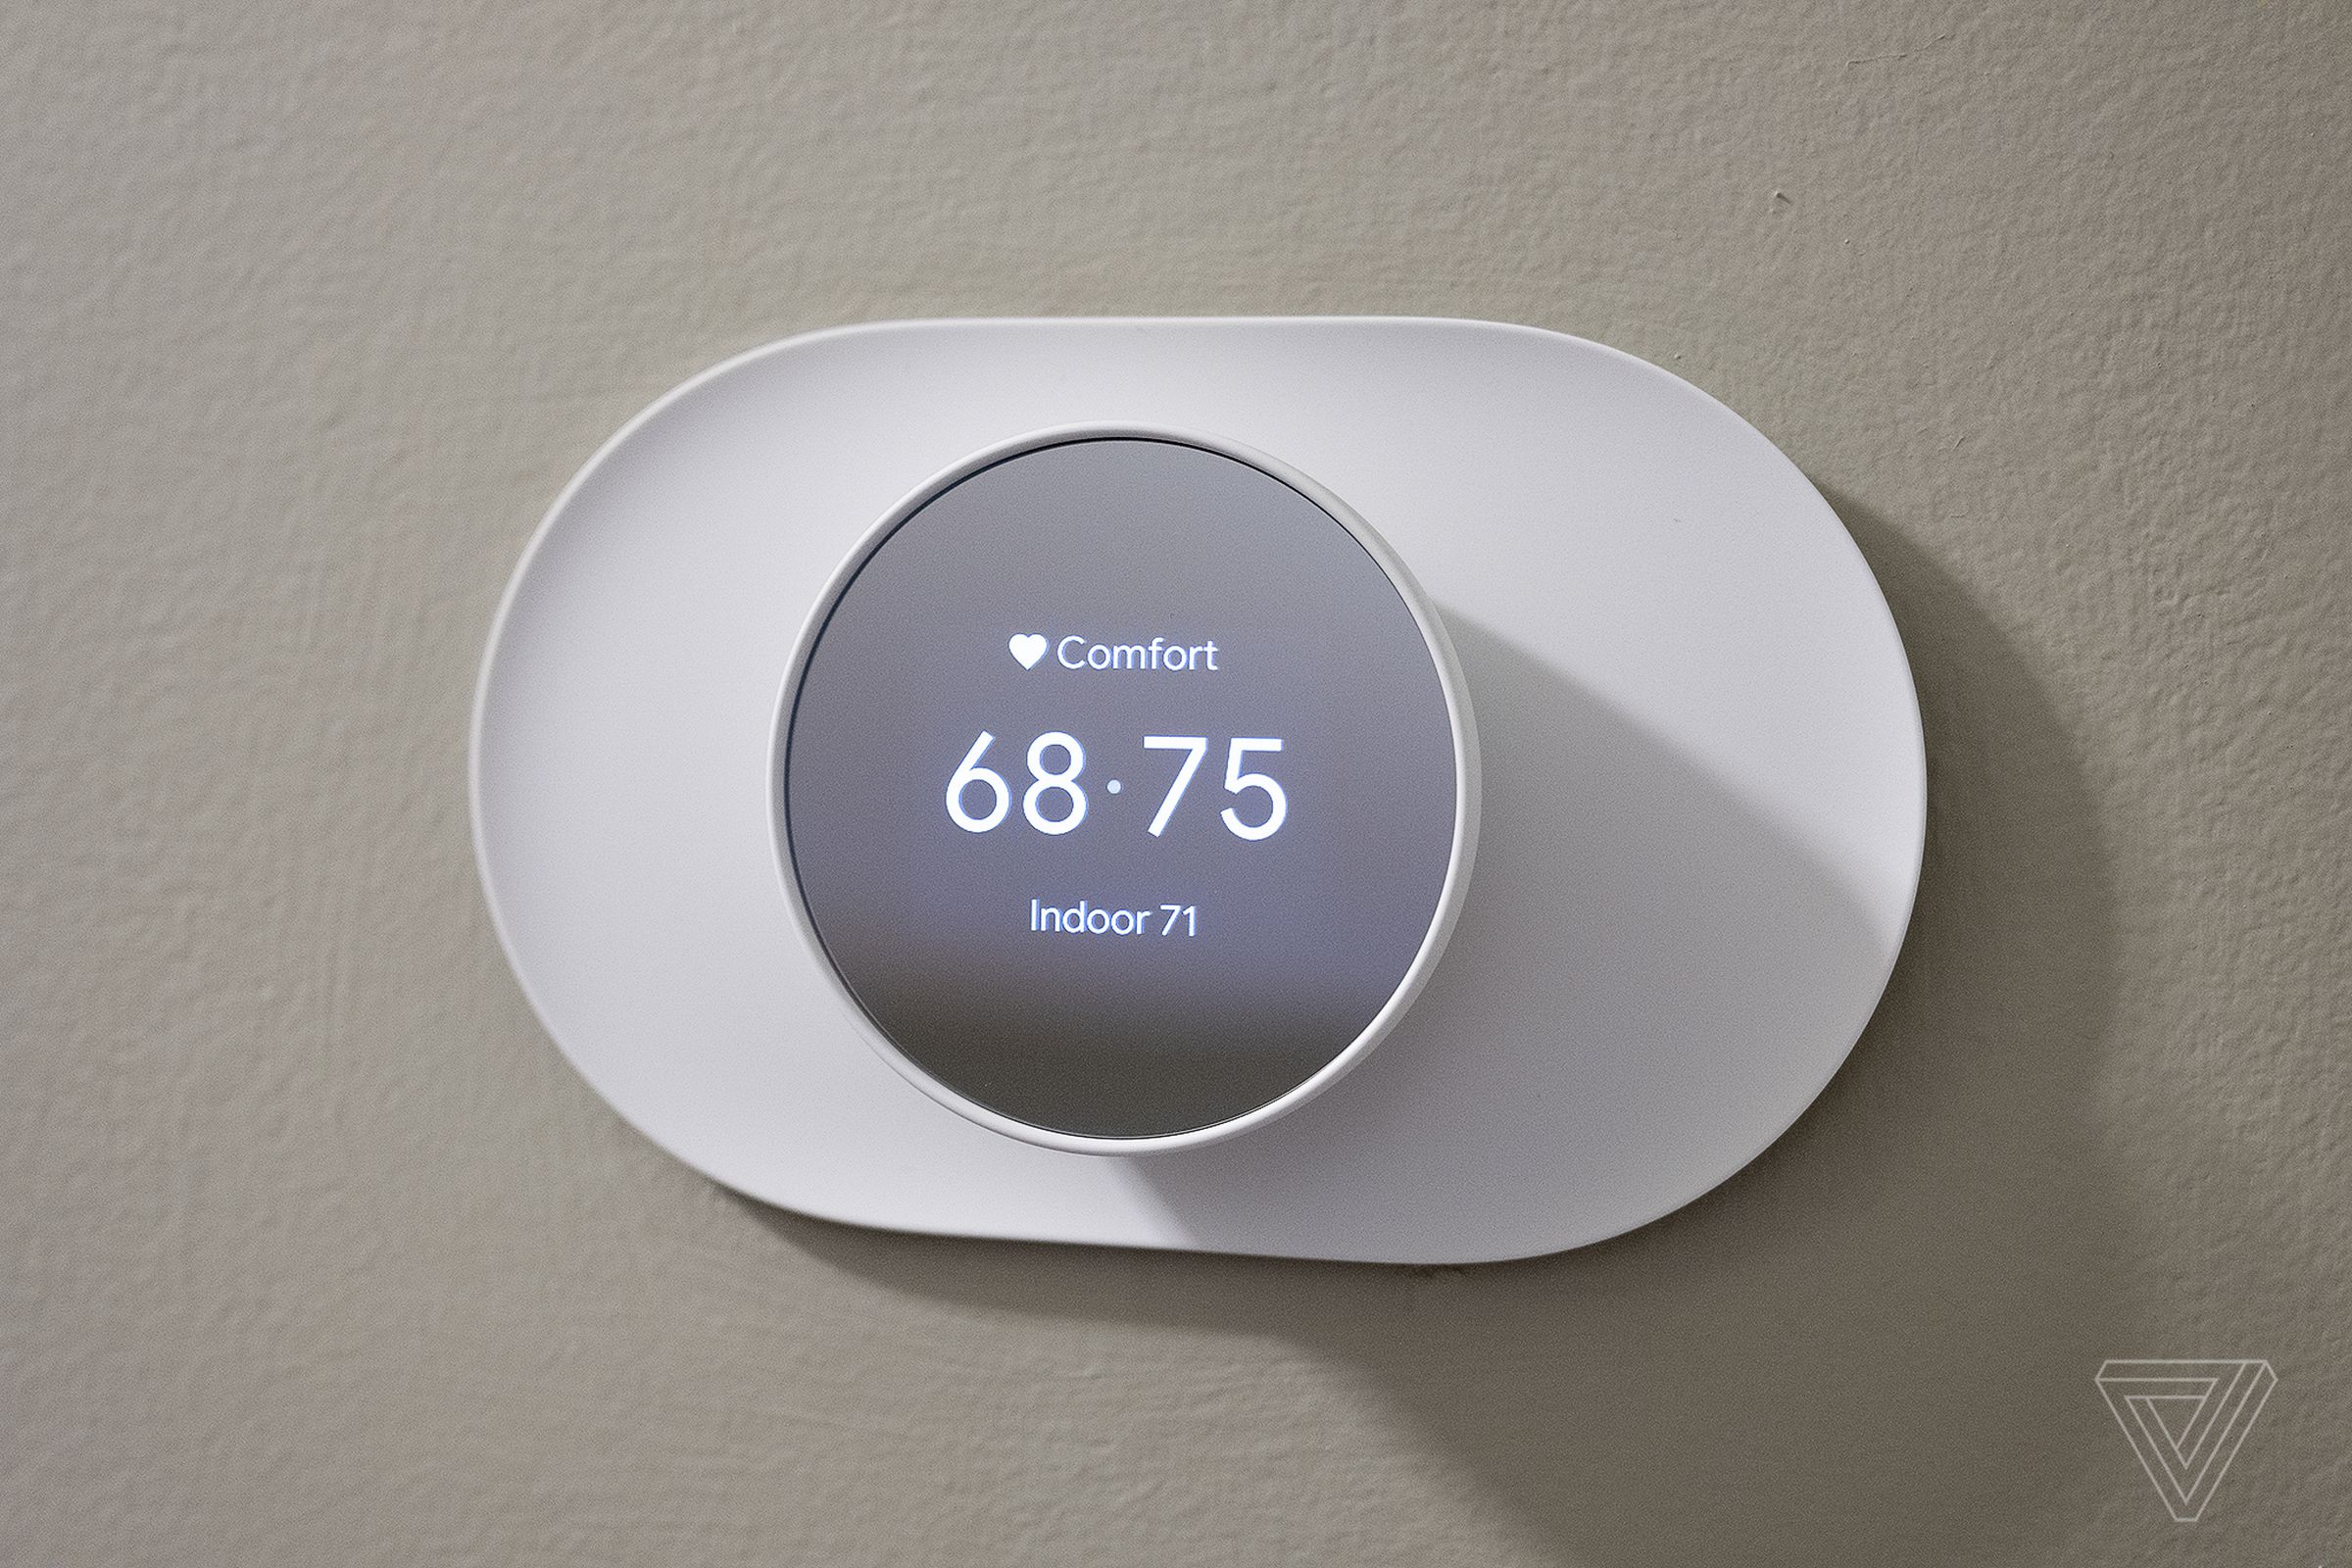 The Nest Thermostat